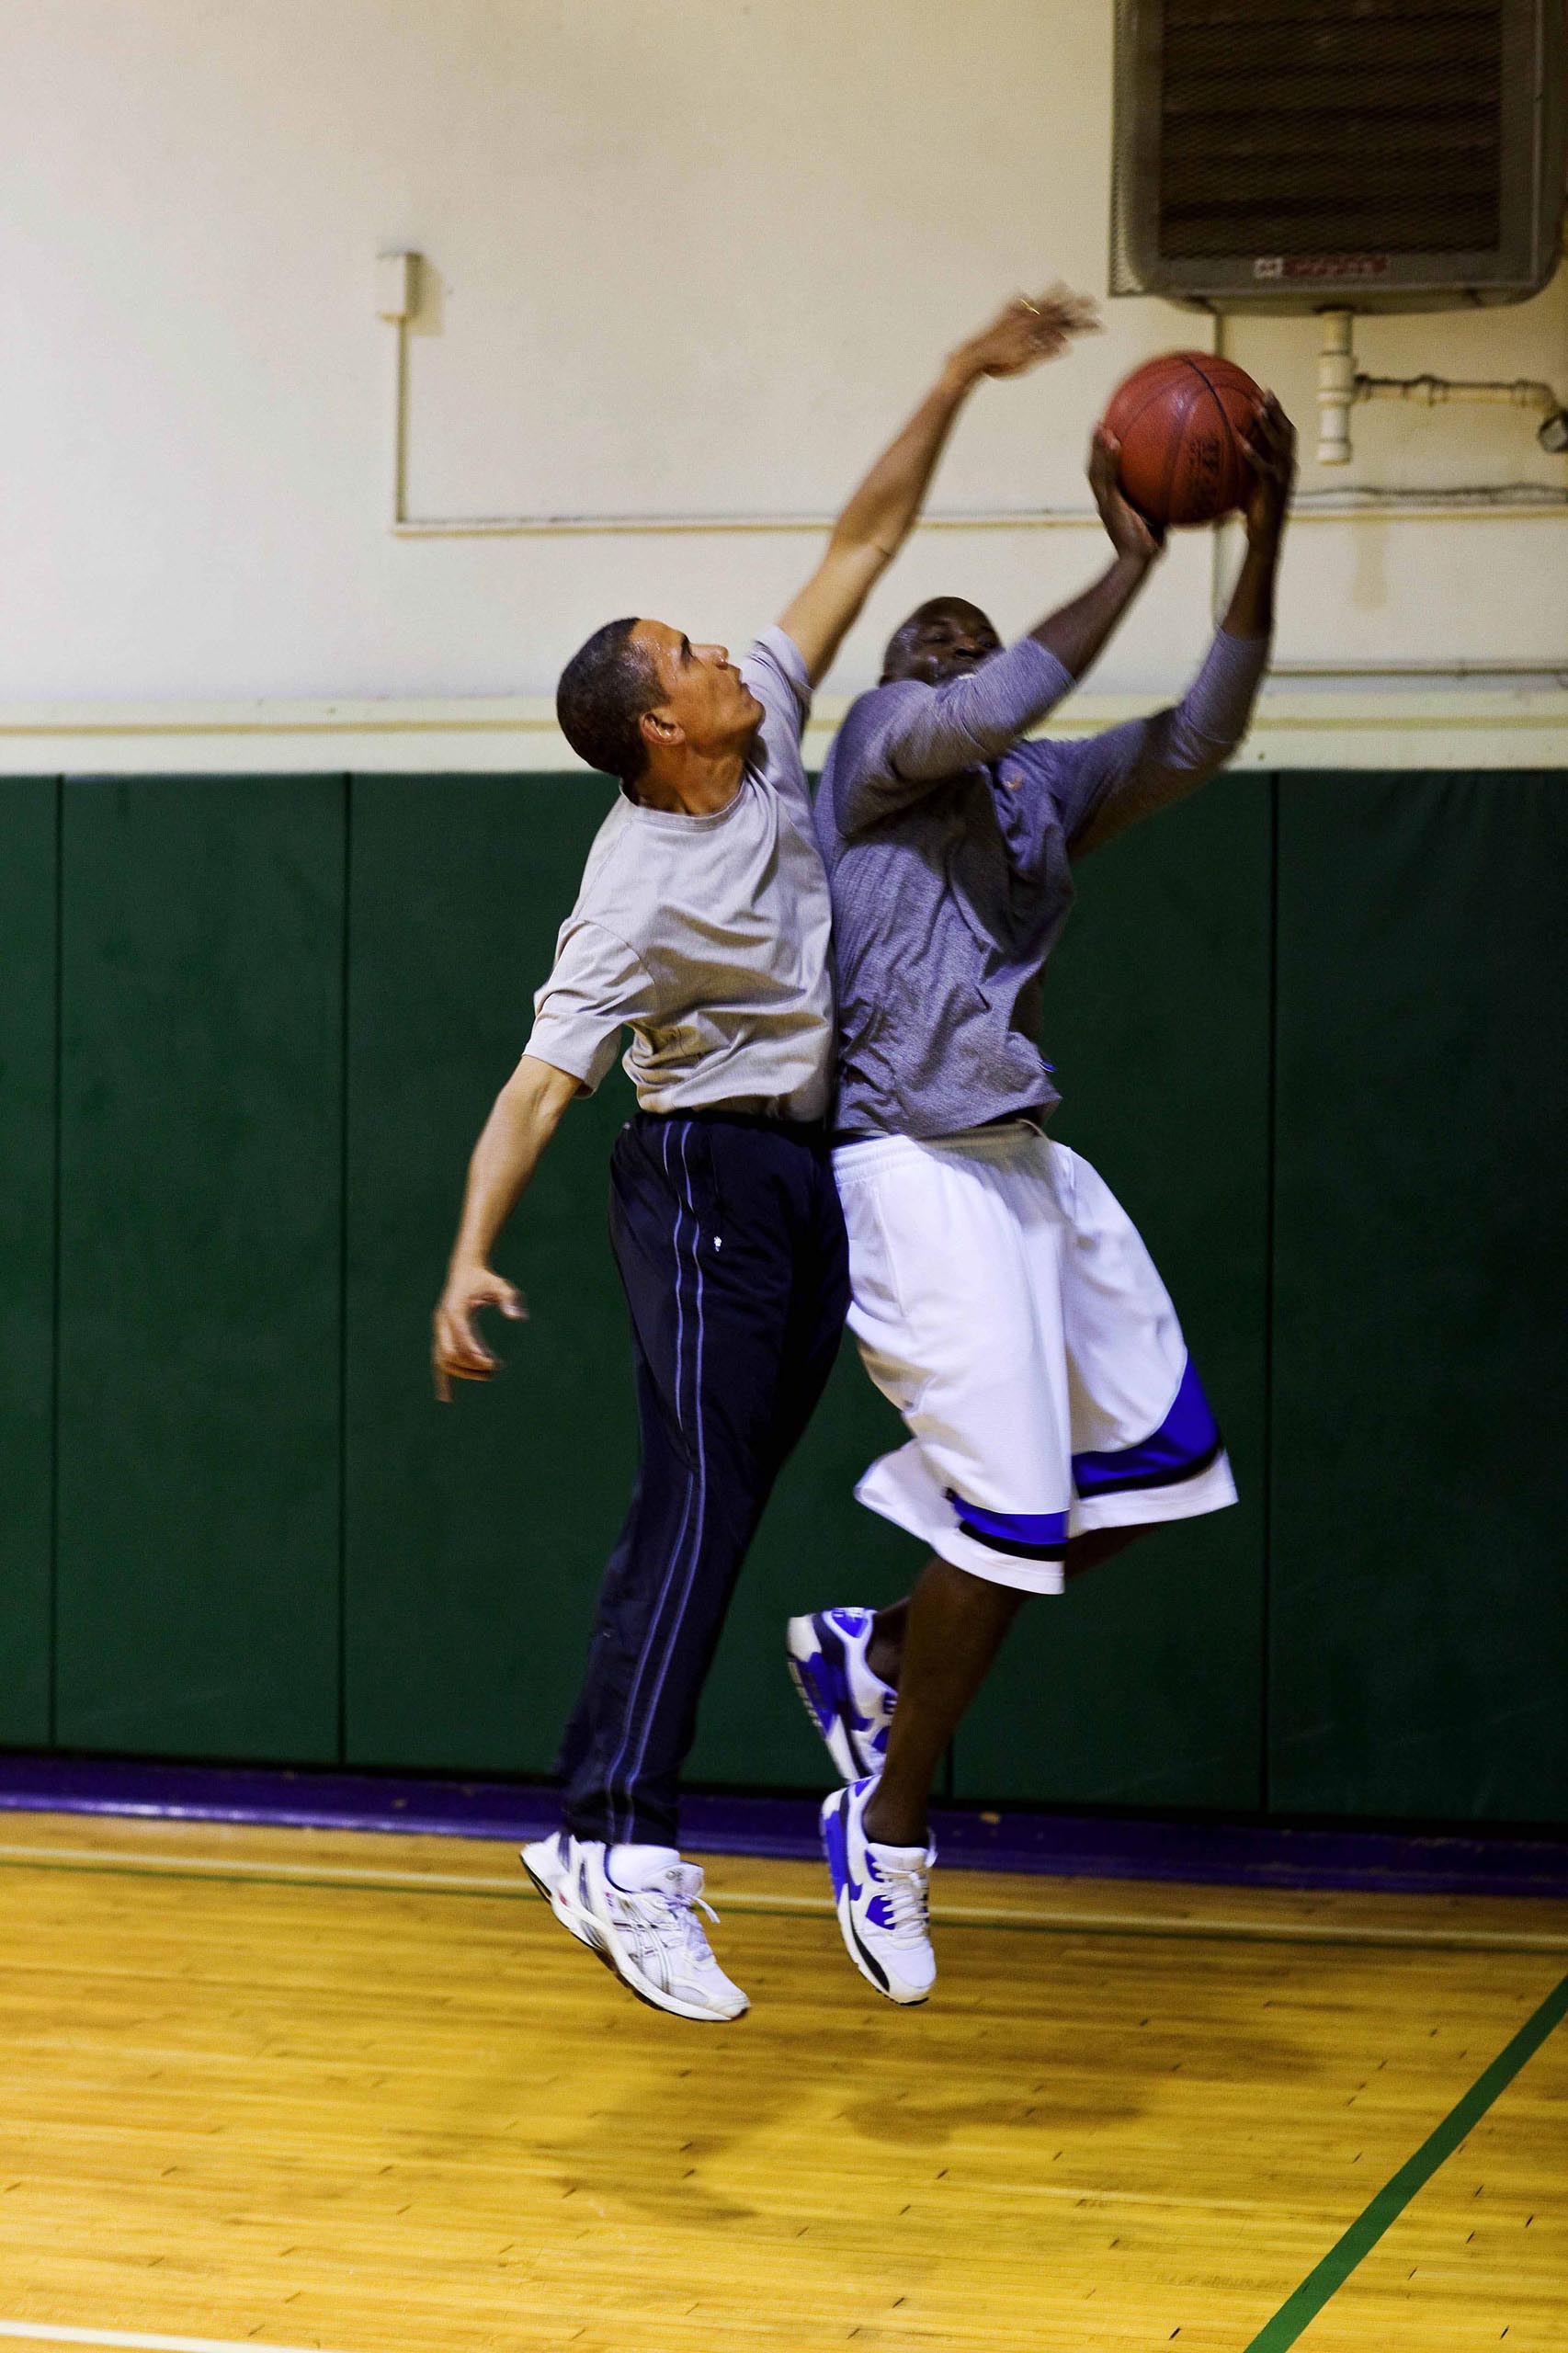 President Barack Obama blocks a shot while playing basketball with personal aide Reggie Love at St Bartholomew's Church in New York City, where the President is attending the United Nations General Assembly, Sept. 23, 2009. (Official White House photo by Pete Souza)This official White House photograph is being made available only for publication by news organizations and/or for personal use printing by the subject(s) of the photograph. The photograph may not be manipulated in any way and may not be used in commercial or political materials, advertisements, emails, products, promotions that in any way suggests approval or endorsement of the President, the First Family, or the White House.